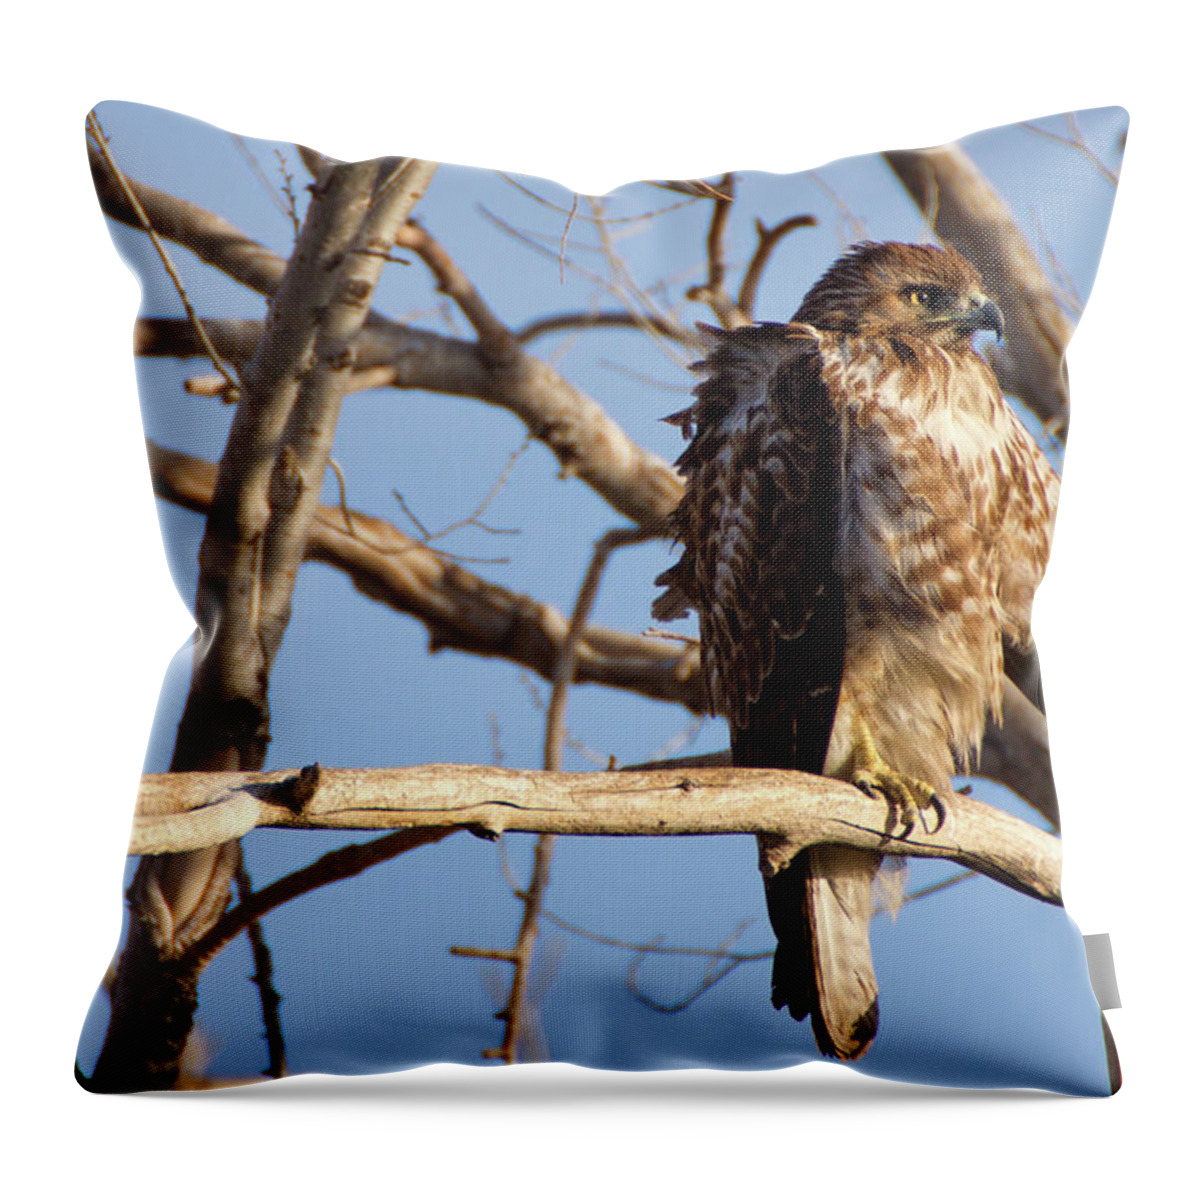 Hawk Throw Pillow featuring the photograph Red Tailed by John De Bord